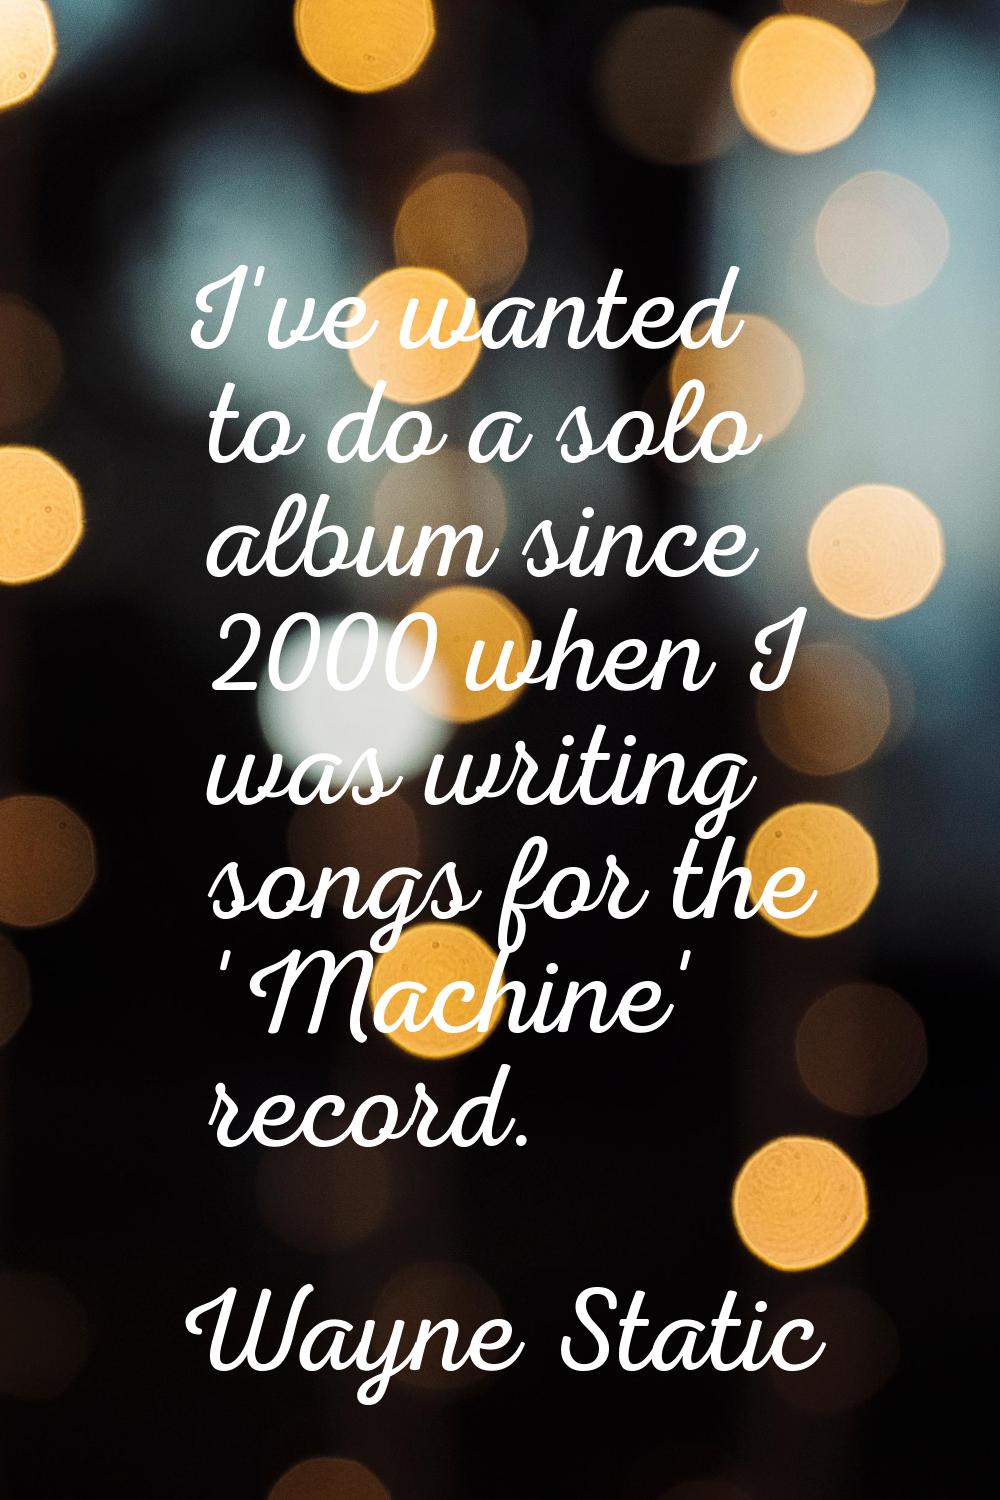 I've wanted to do a solo album since 2000 when I was writing songs for the 'Machine' record.